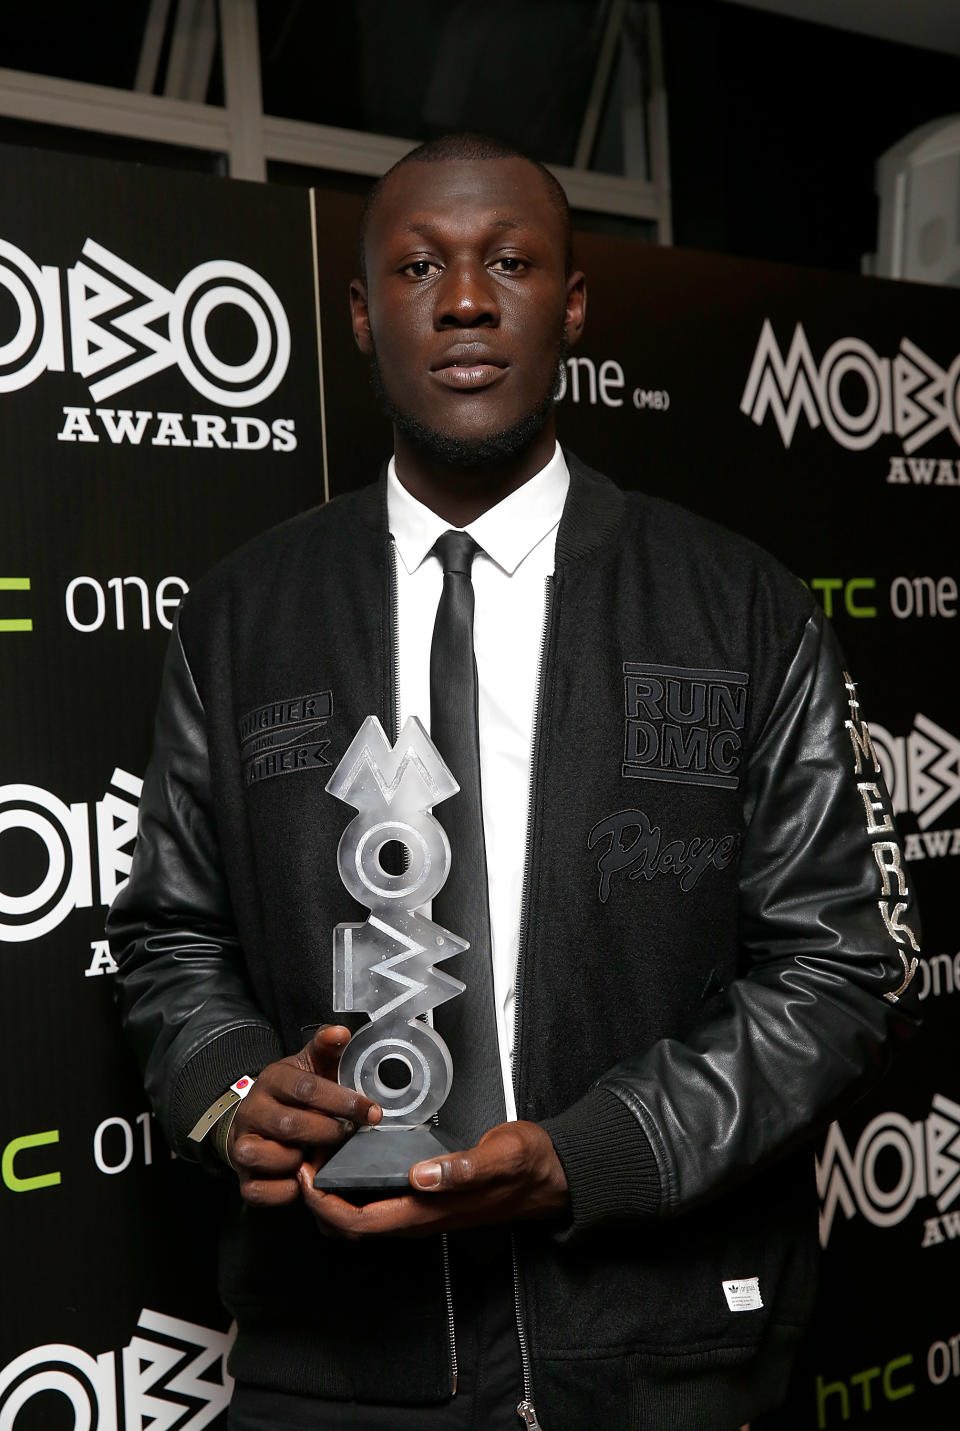 LONDON, ENGLAND - OCTOBER 22:  Stormzy poses with the MOBO award for Best Grime Act in the winners room at the MOBO Awards at SSE Arena on October 22, 2014 in London, England.  (Photo by Tristan Fewings/Getty Images)